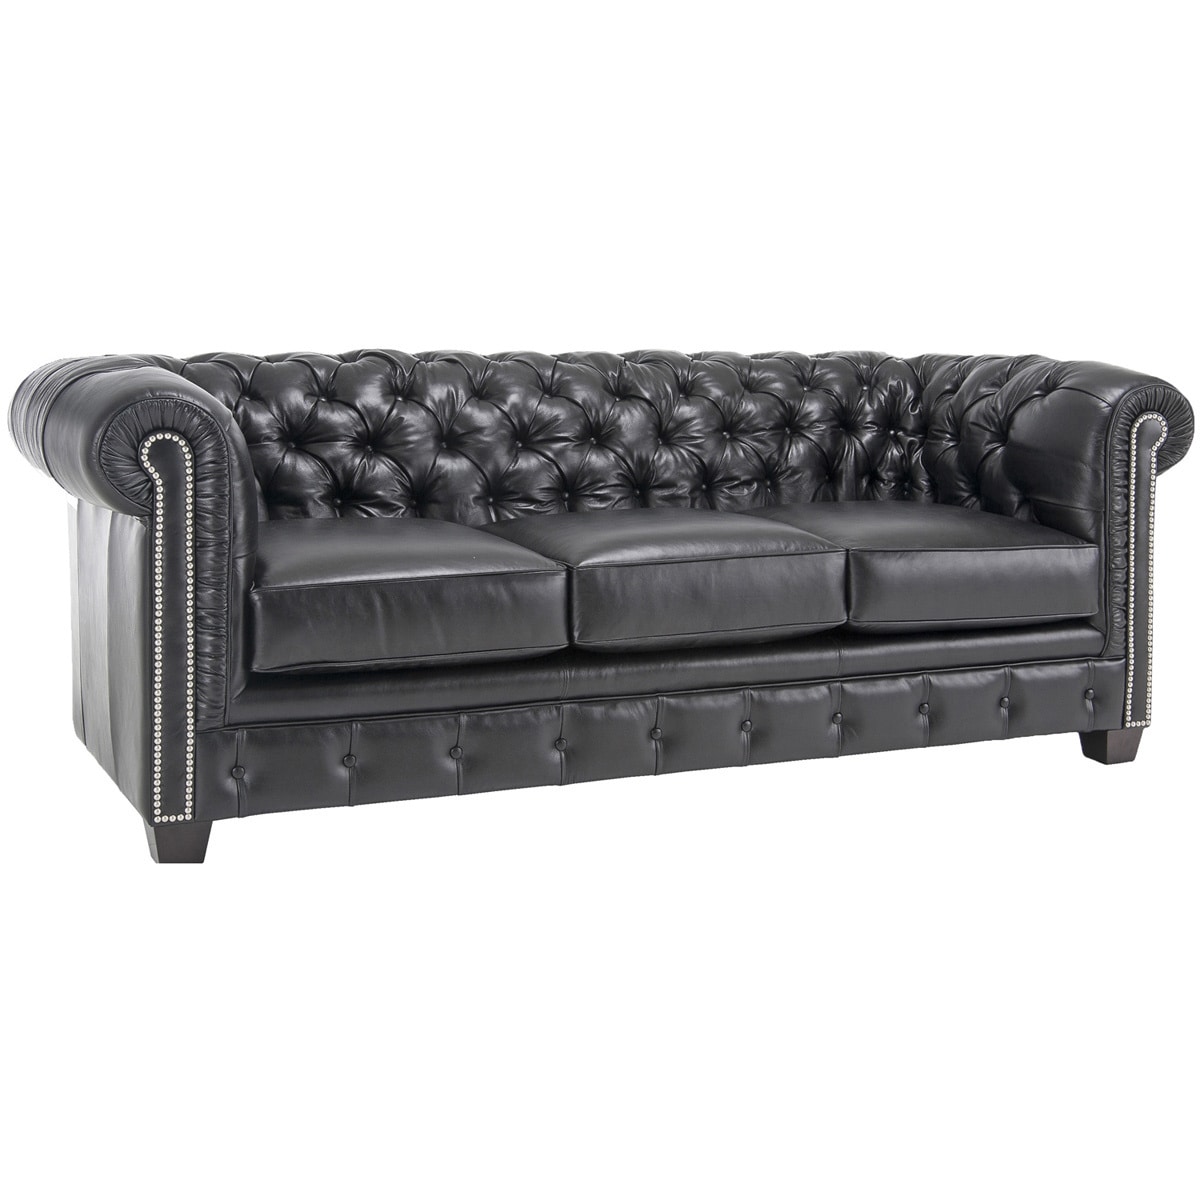 Featured image of post Distressed Black Leather Sofa : Distressed black leather sofas for a timeless beauty and elegance.